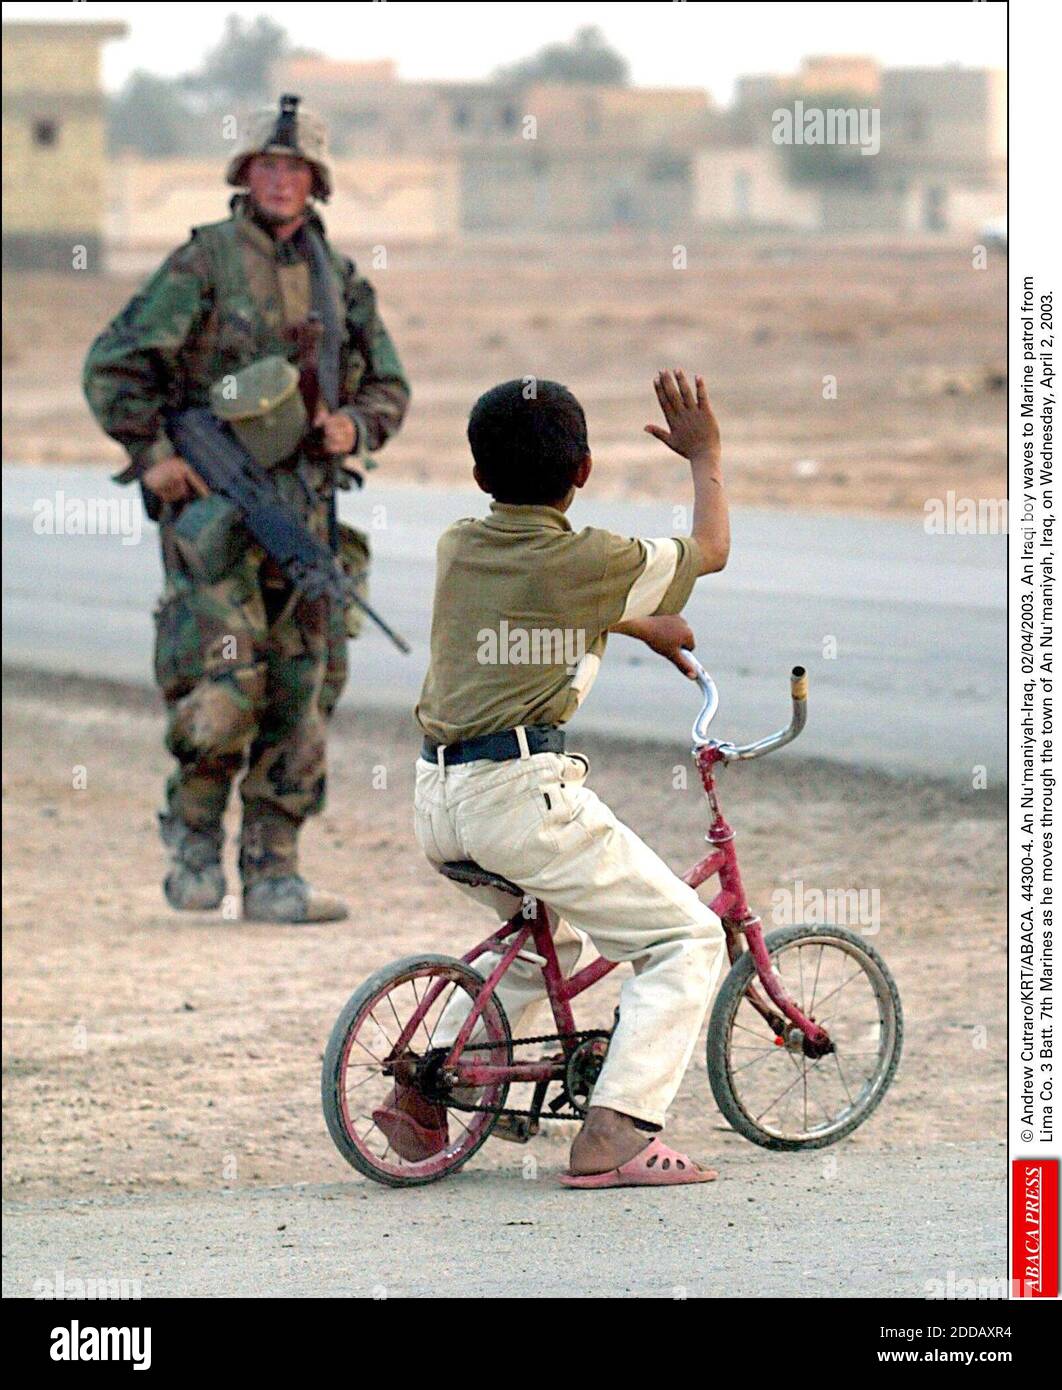 NO FILM, NO VIDEO, NO TV, NO DOCUMENTARY - © Andrew Cutraro/KRT/ABACA. 44300-4. An Nu'maniyah-Iraq, 02/04/2003. An Iraqi boy waves to Marine patrol fromLima Co. 3 Batt. 7th Marines as he moves through the town of An Nu'maniyah, Iraq, on Wednesday, April 2, 2003. Stock Photo